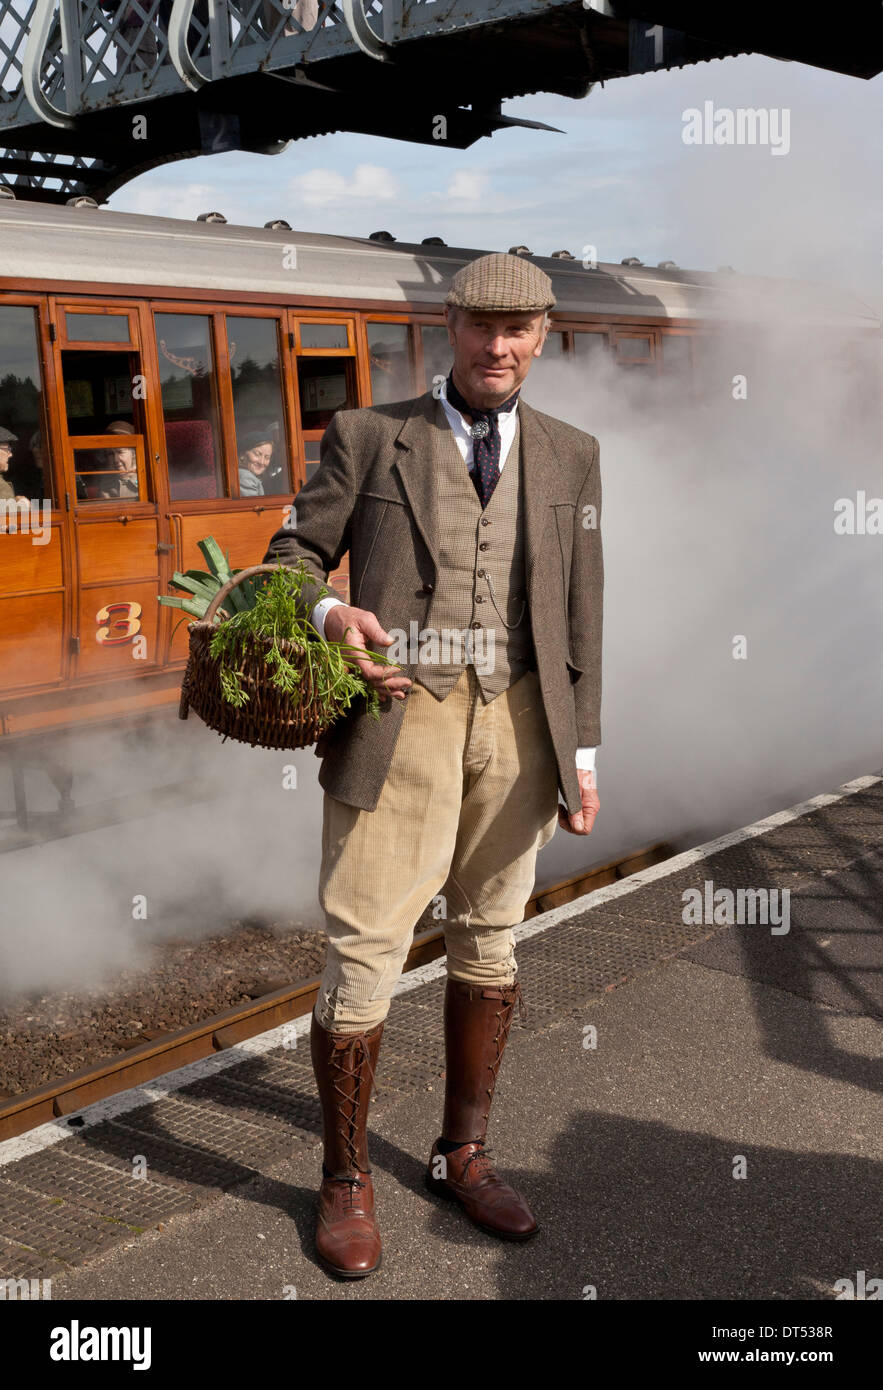 A farmer in 1940's costume at a railway station Stock Photo